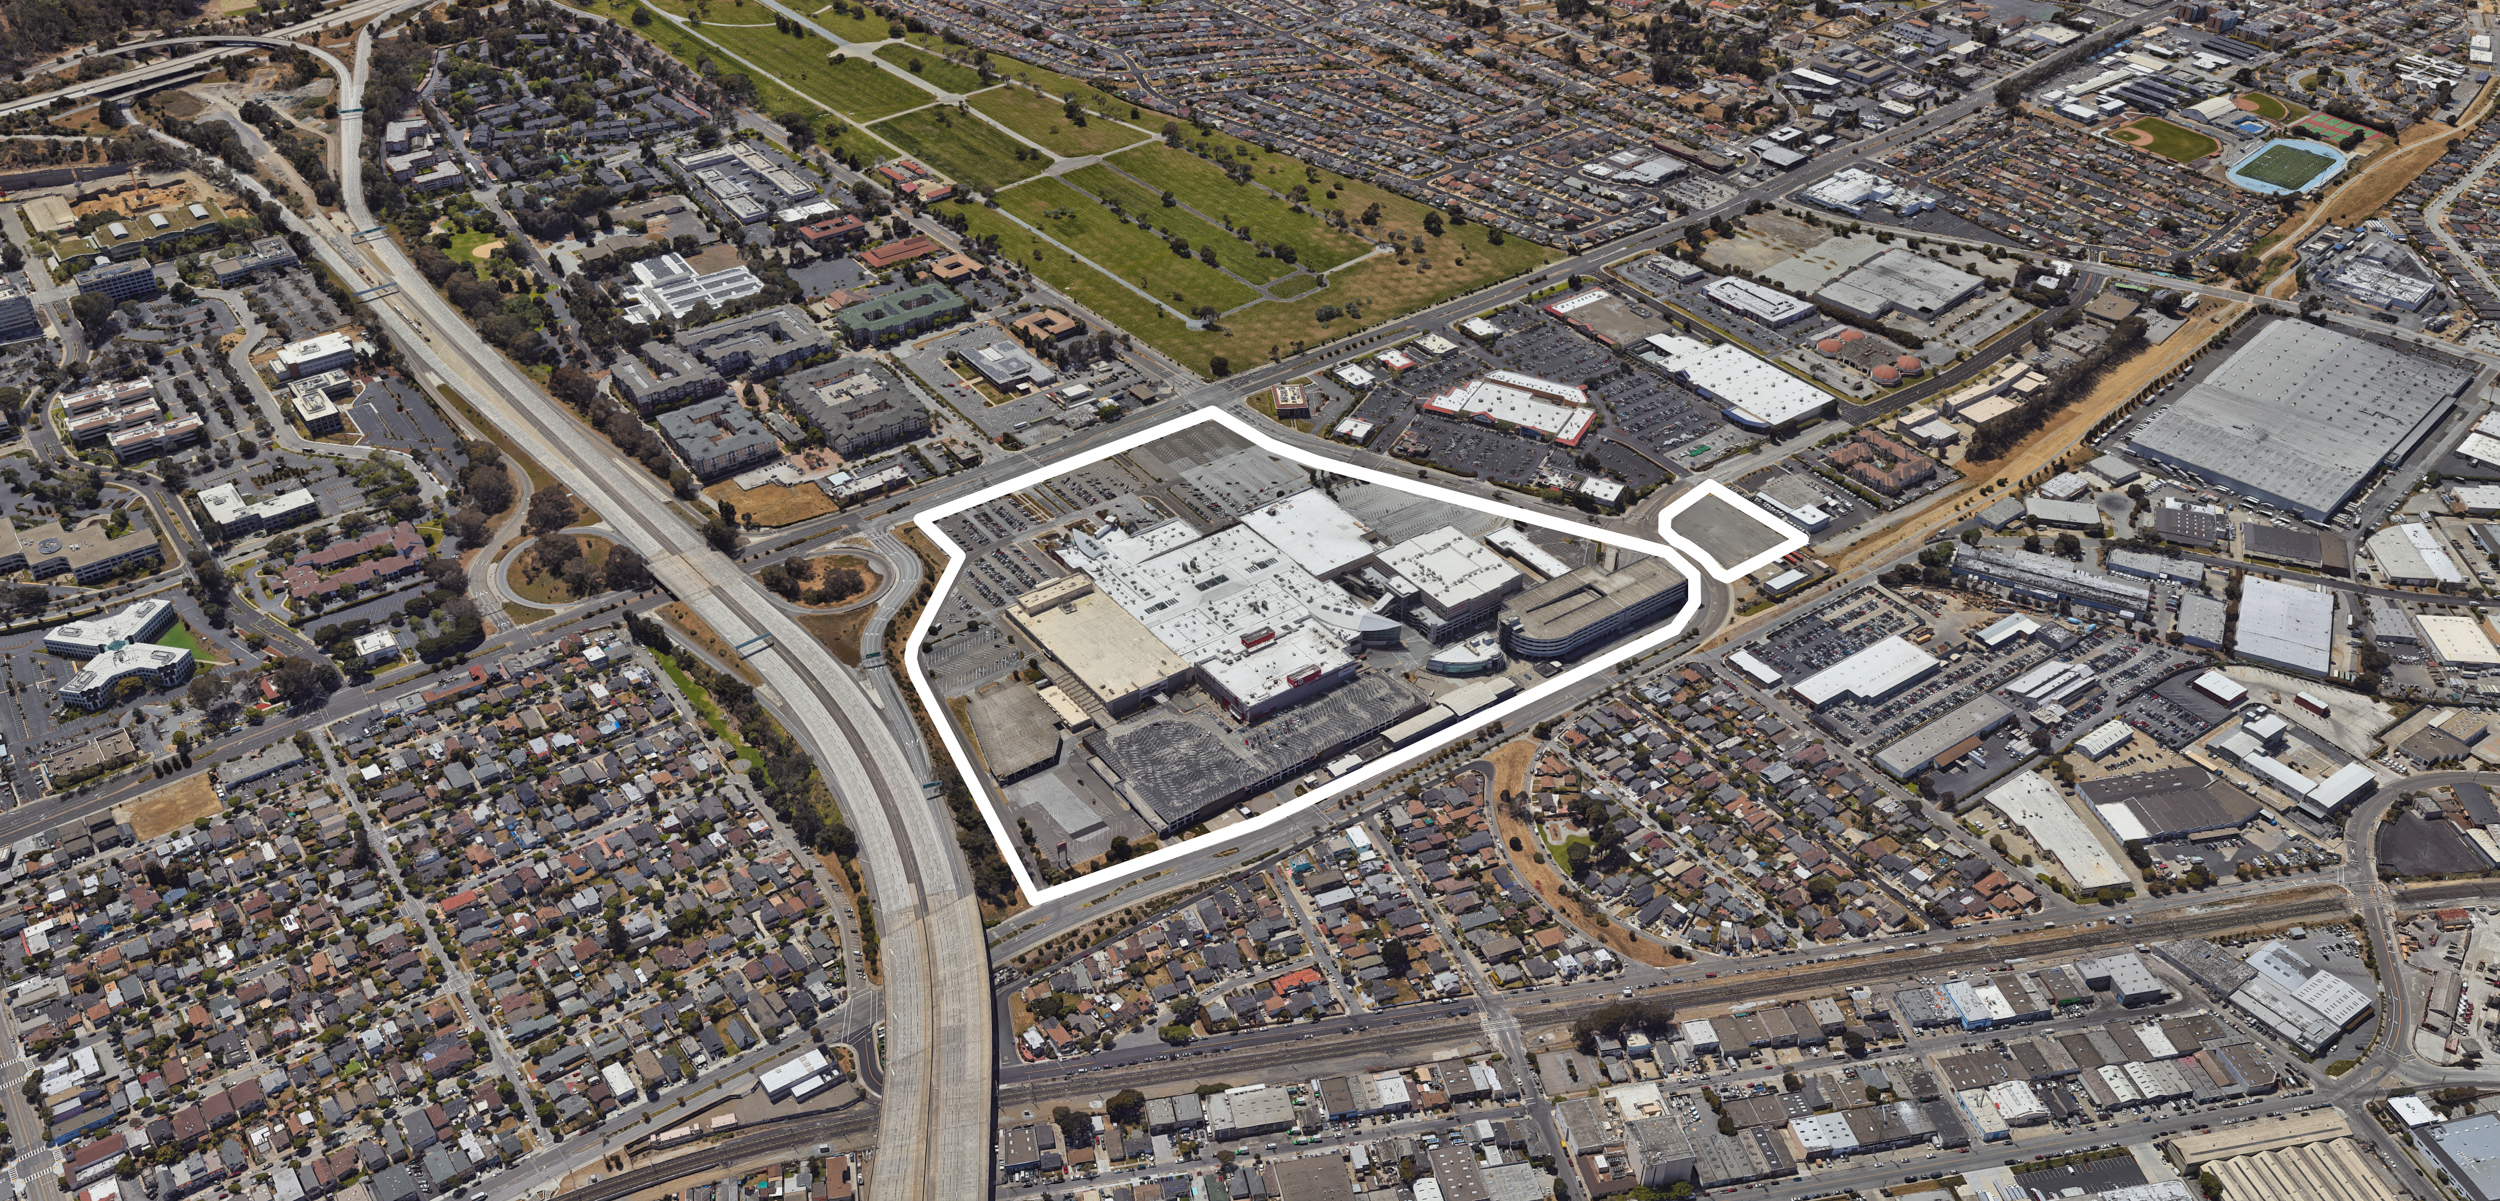 Tanforan Mall existing condition roughly outlined by YIMBY, image via Google Satellite